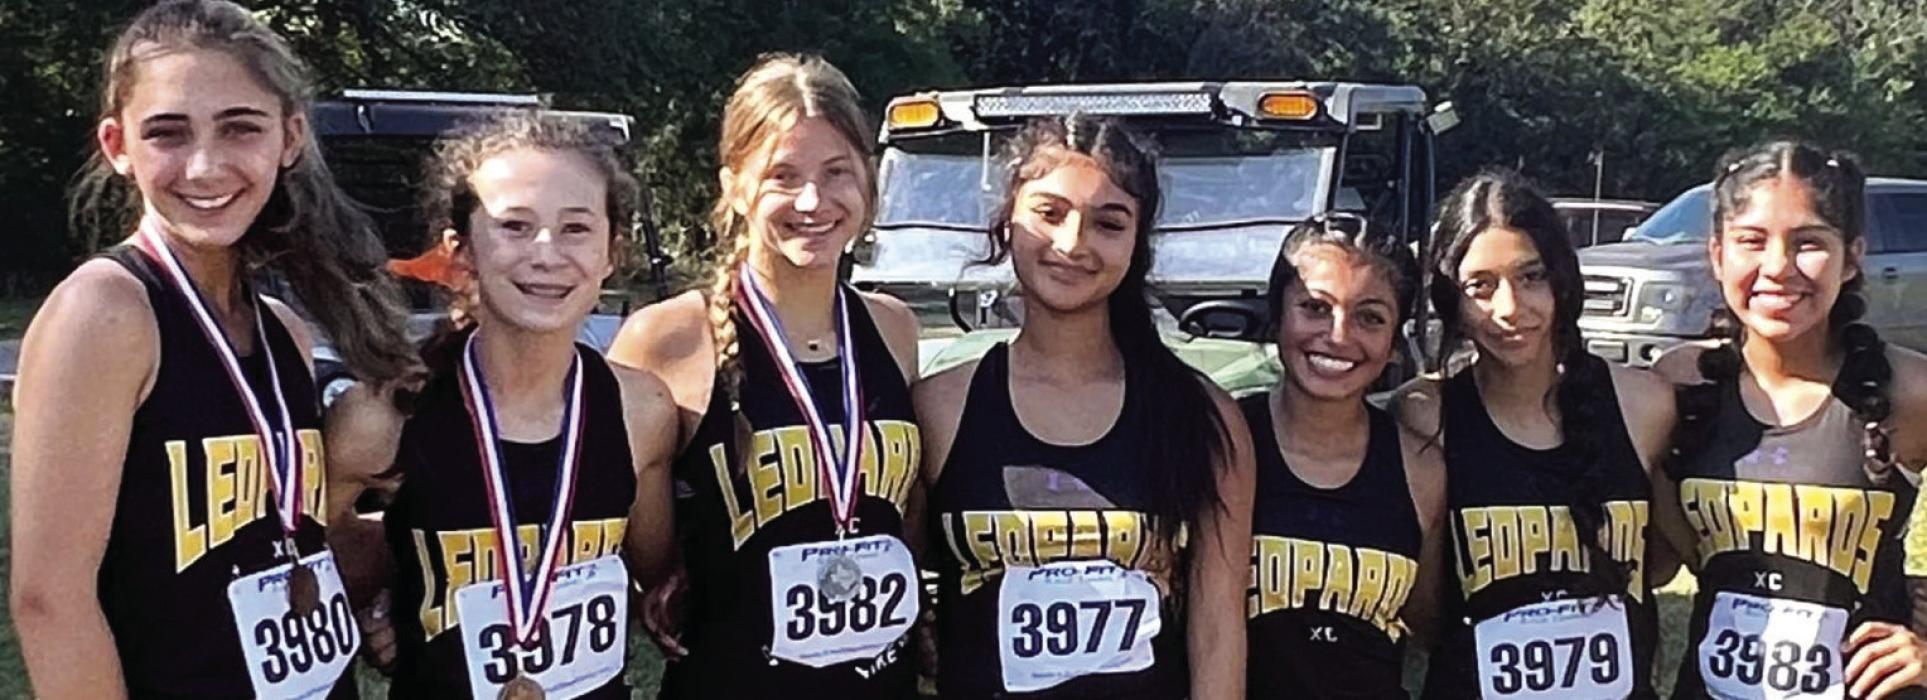 La Grange Cross Country Runners Compete at District Meet